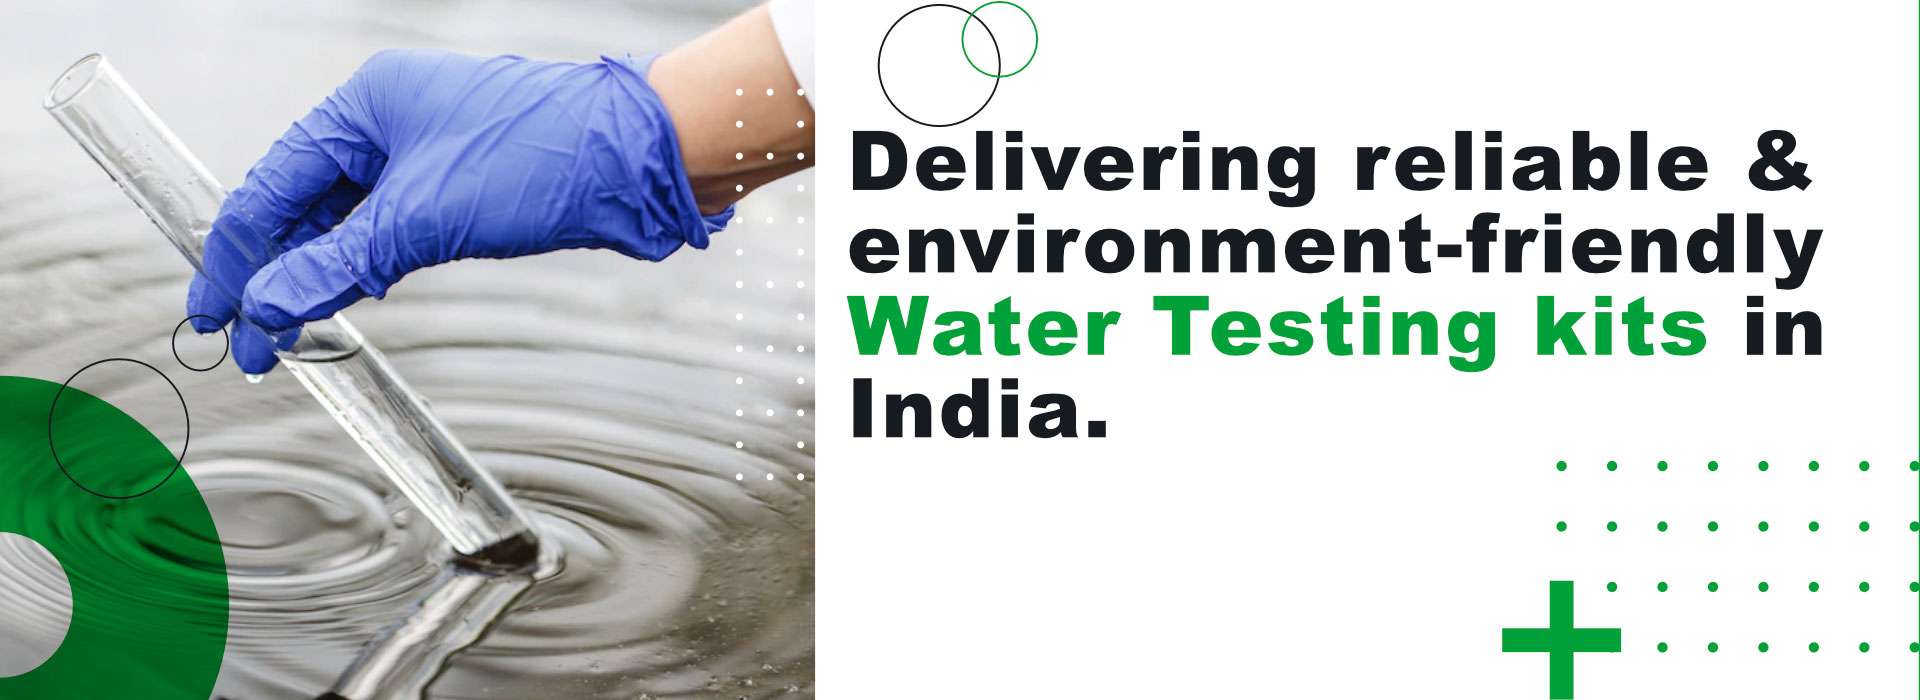  Delivering reliable & environment-friendly water Testing kits in India Manufacturers in Nigeria